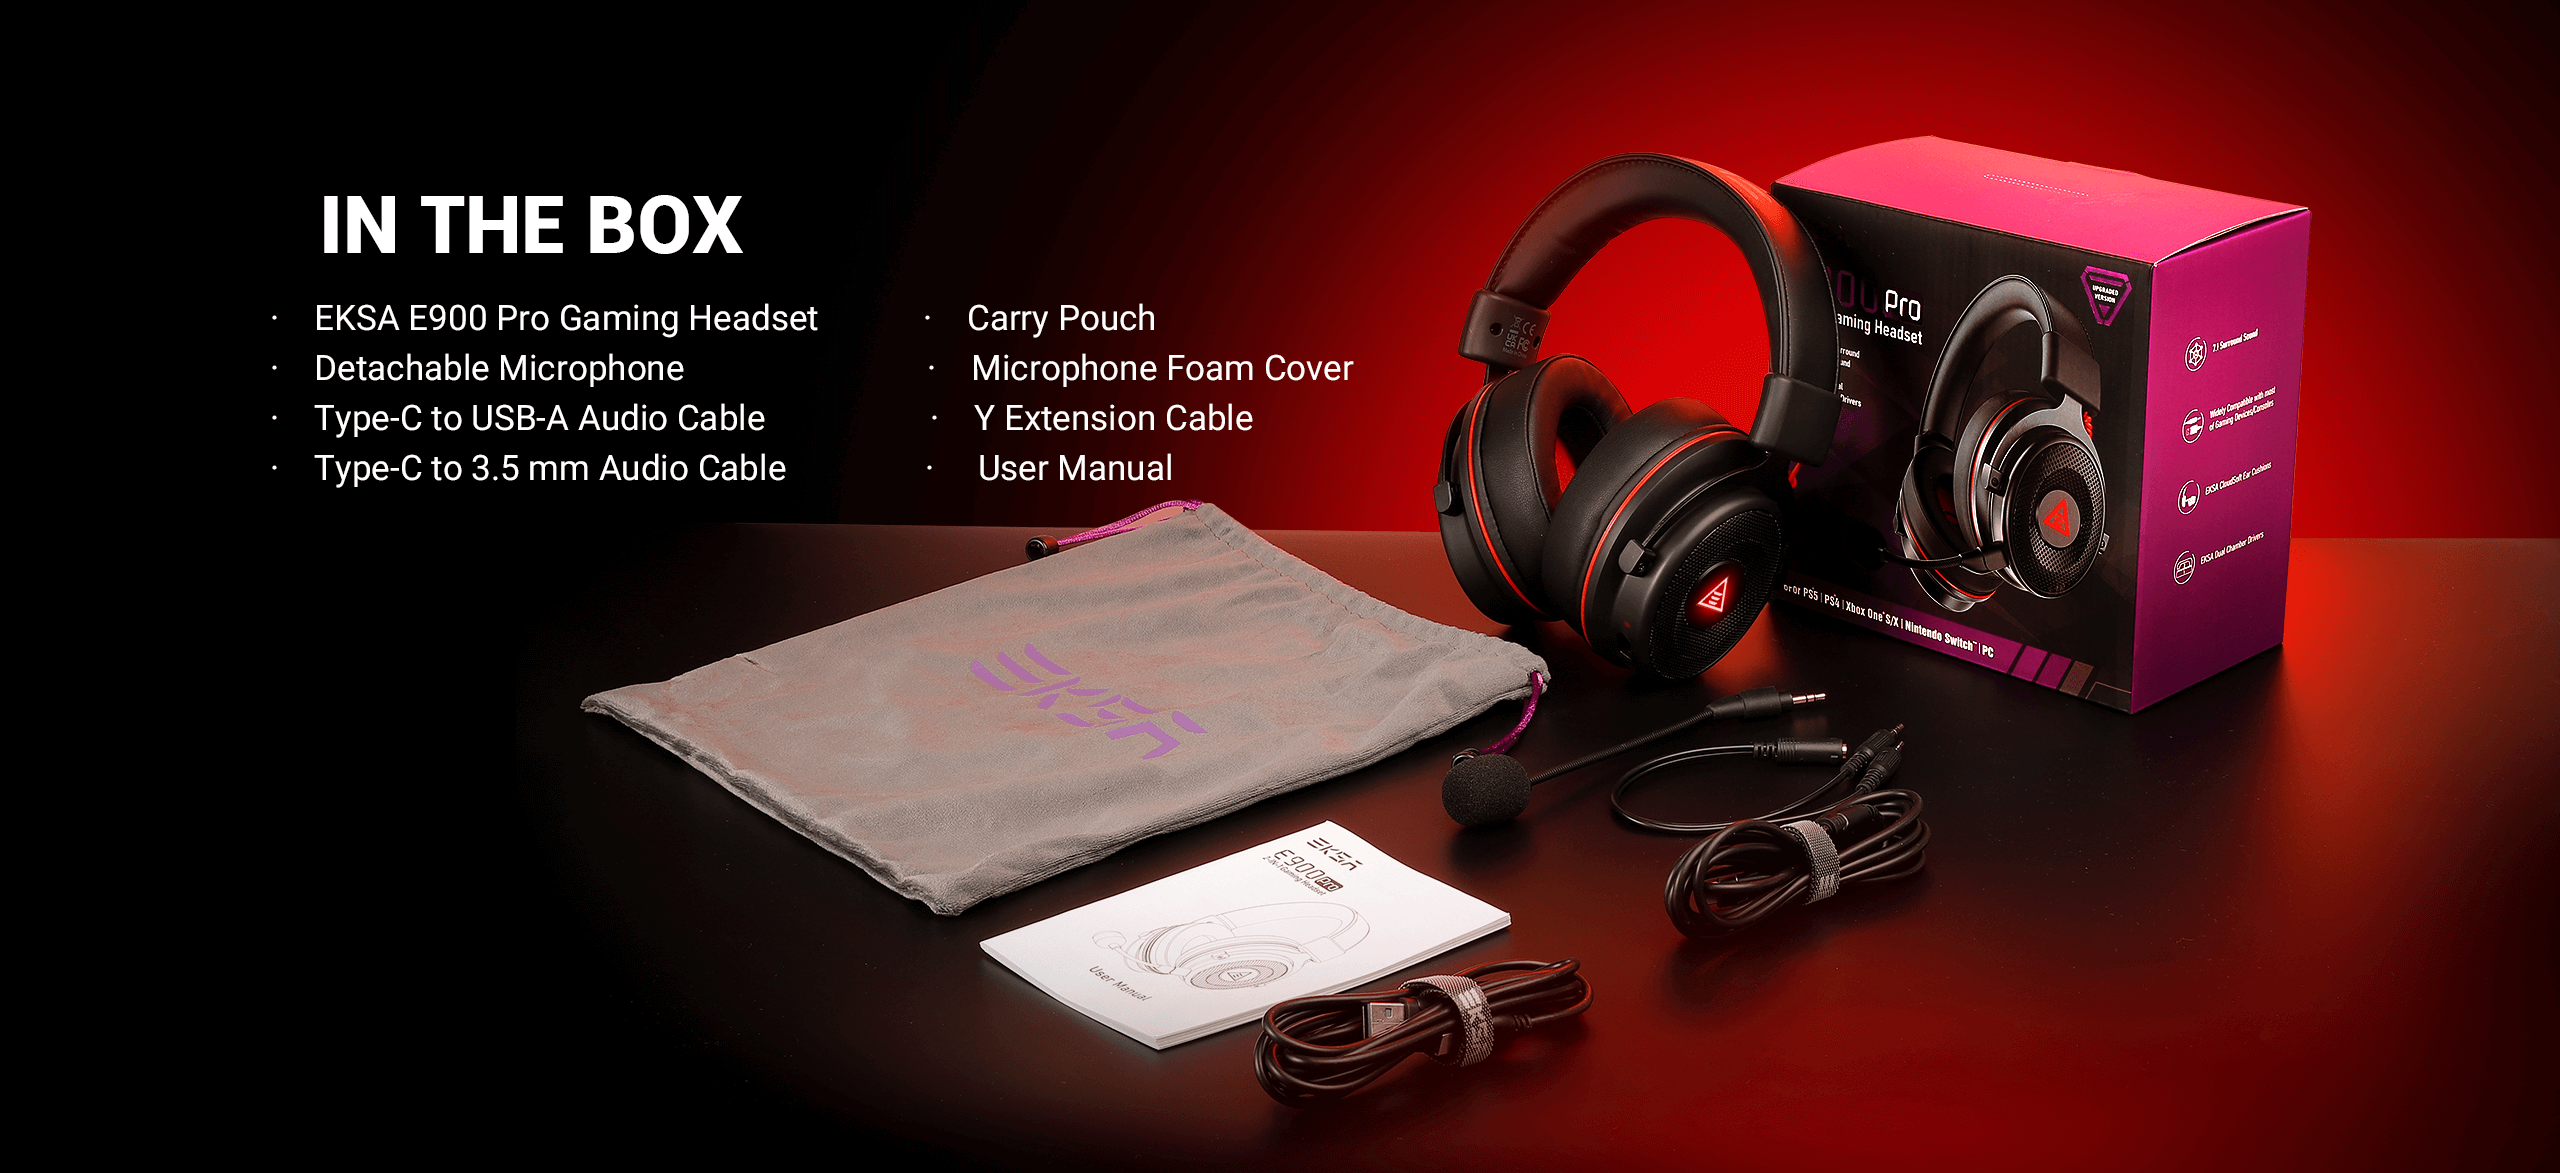 EKSA E900 Pro Upgraded Gaming Headset Packaging Contents